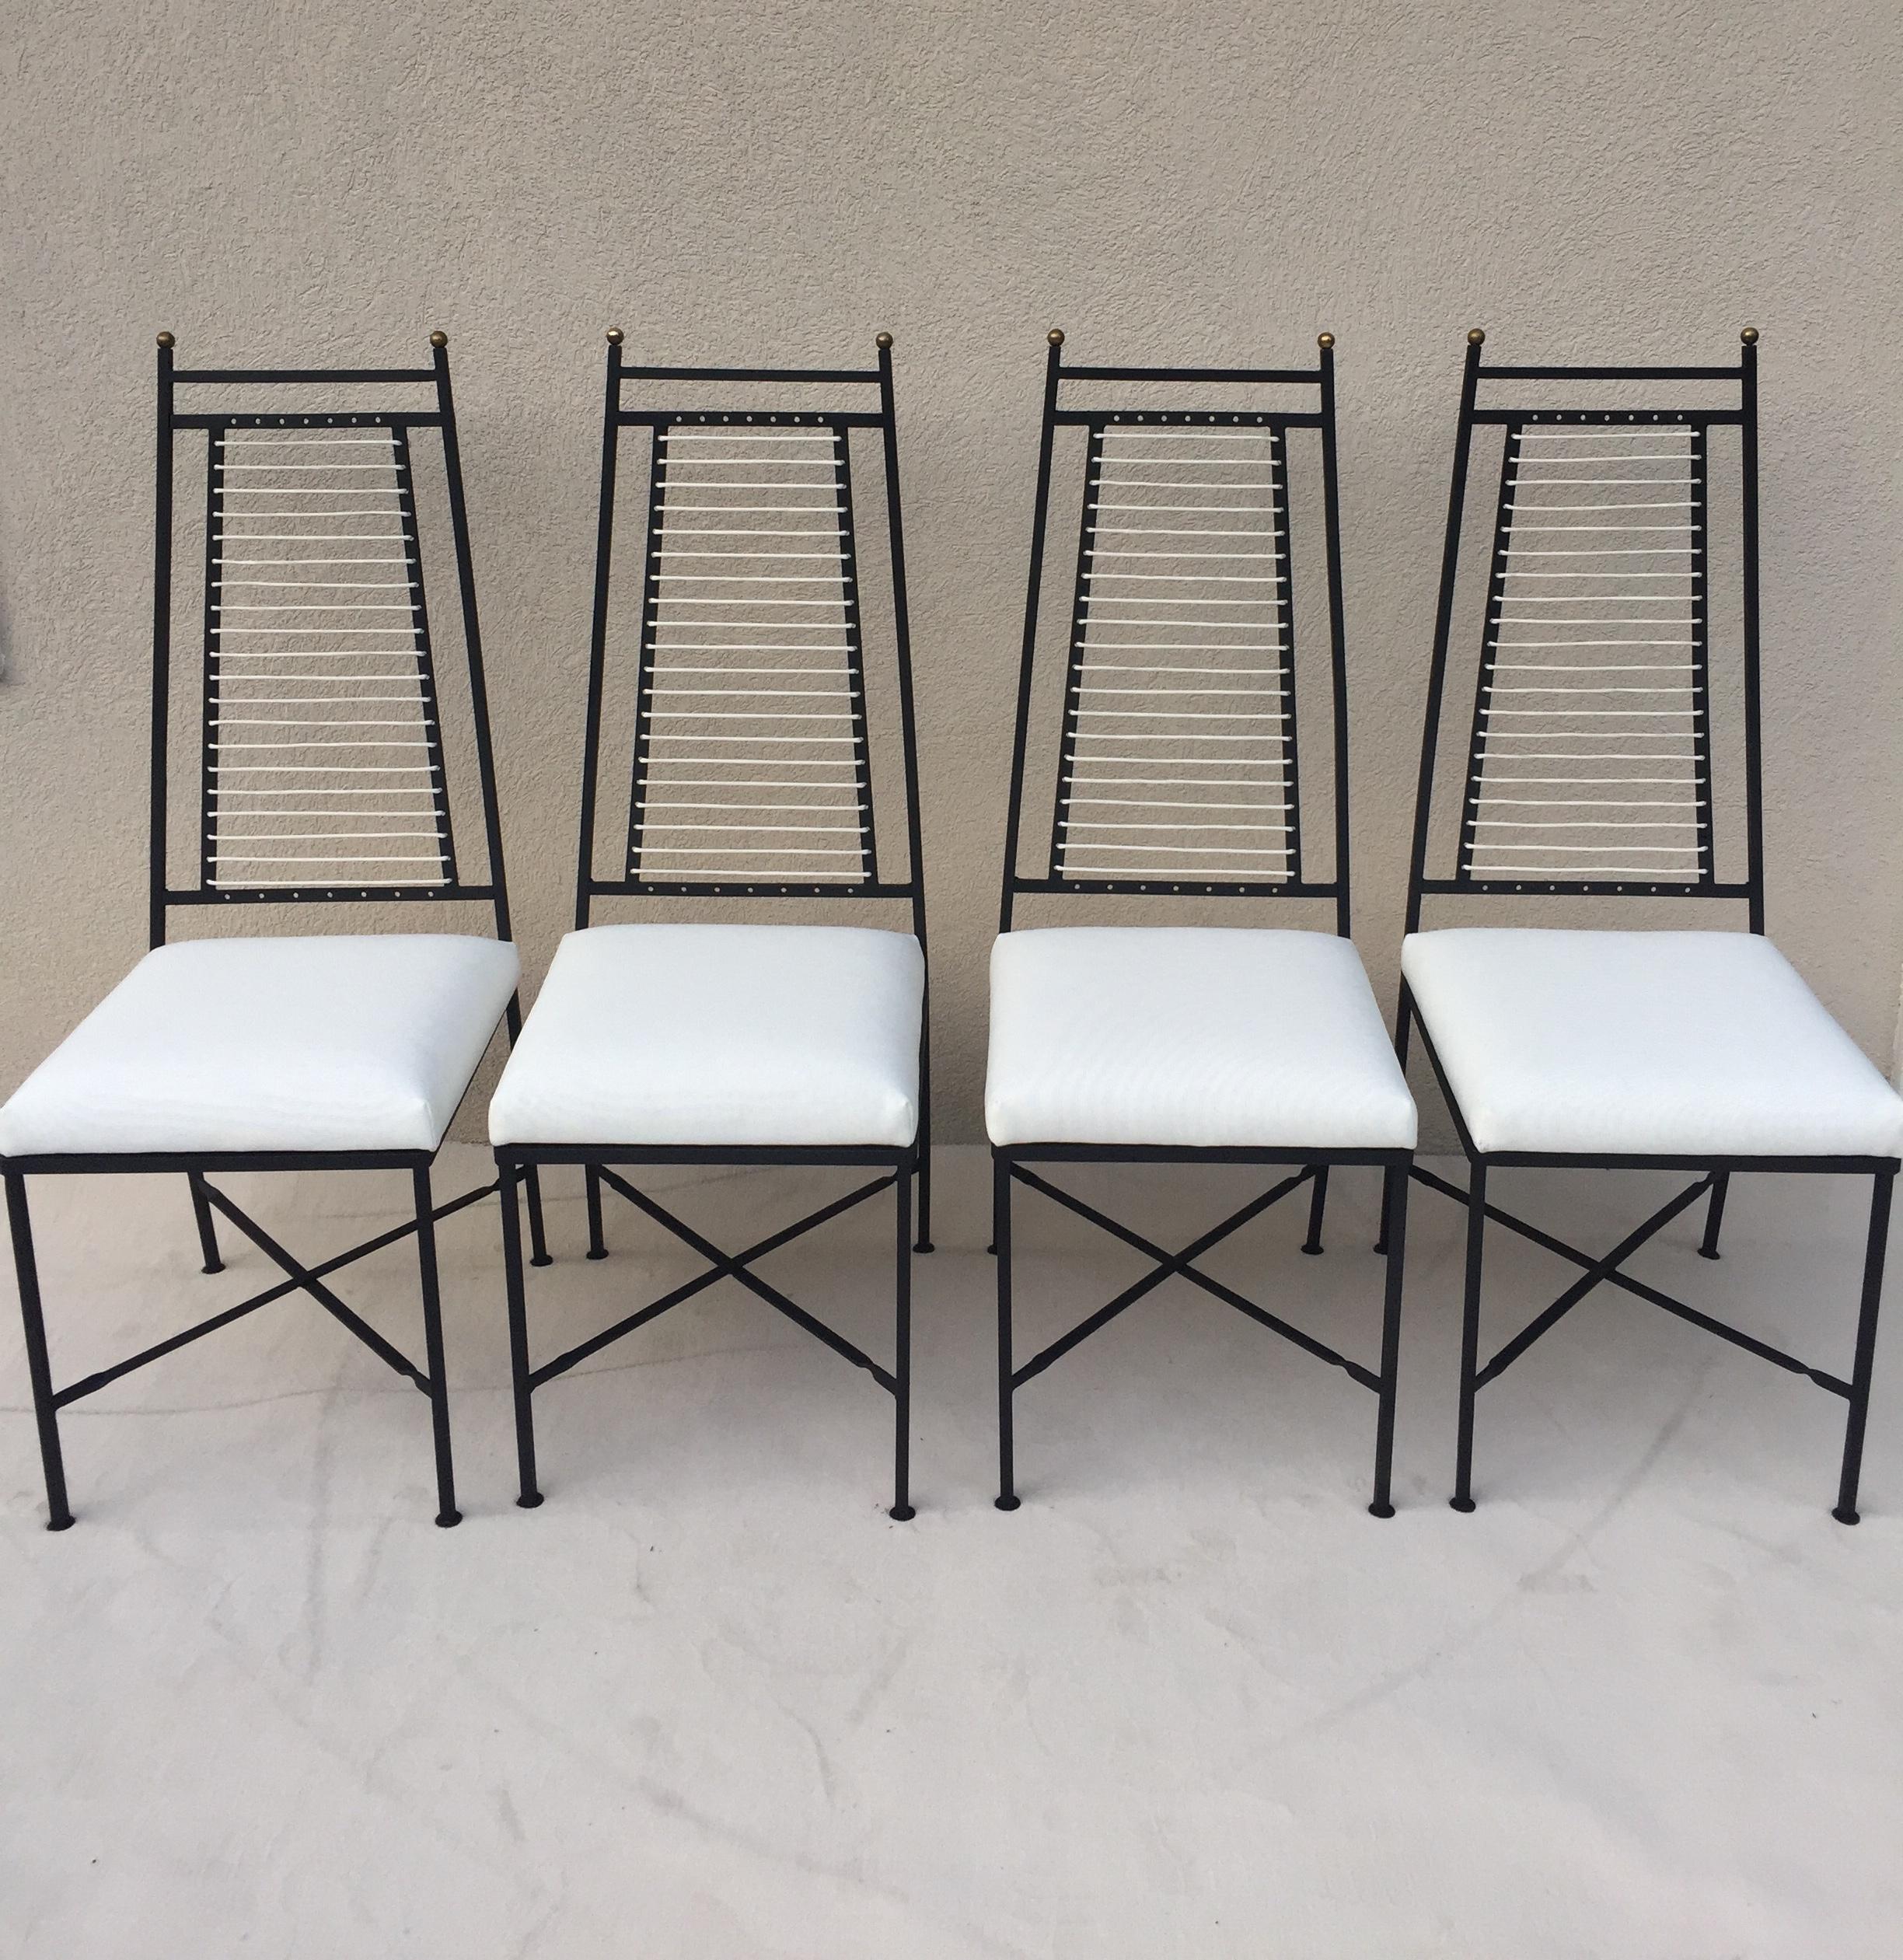 Salterini set 6 high back bronze top white cord back Iron chairs, cushioned foam seat off white woven fabric. Two arm chairs measurements are 42.50 high x 19.50 wide with arms x 17 deep. 4 side chairs measure 17' wide without arms. 18 seat height.